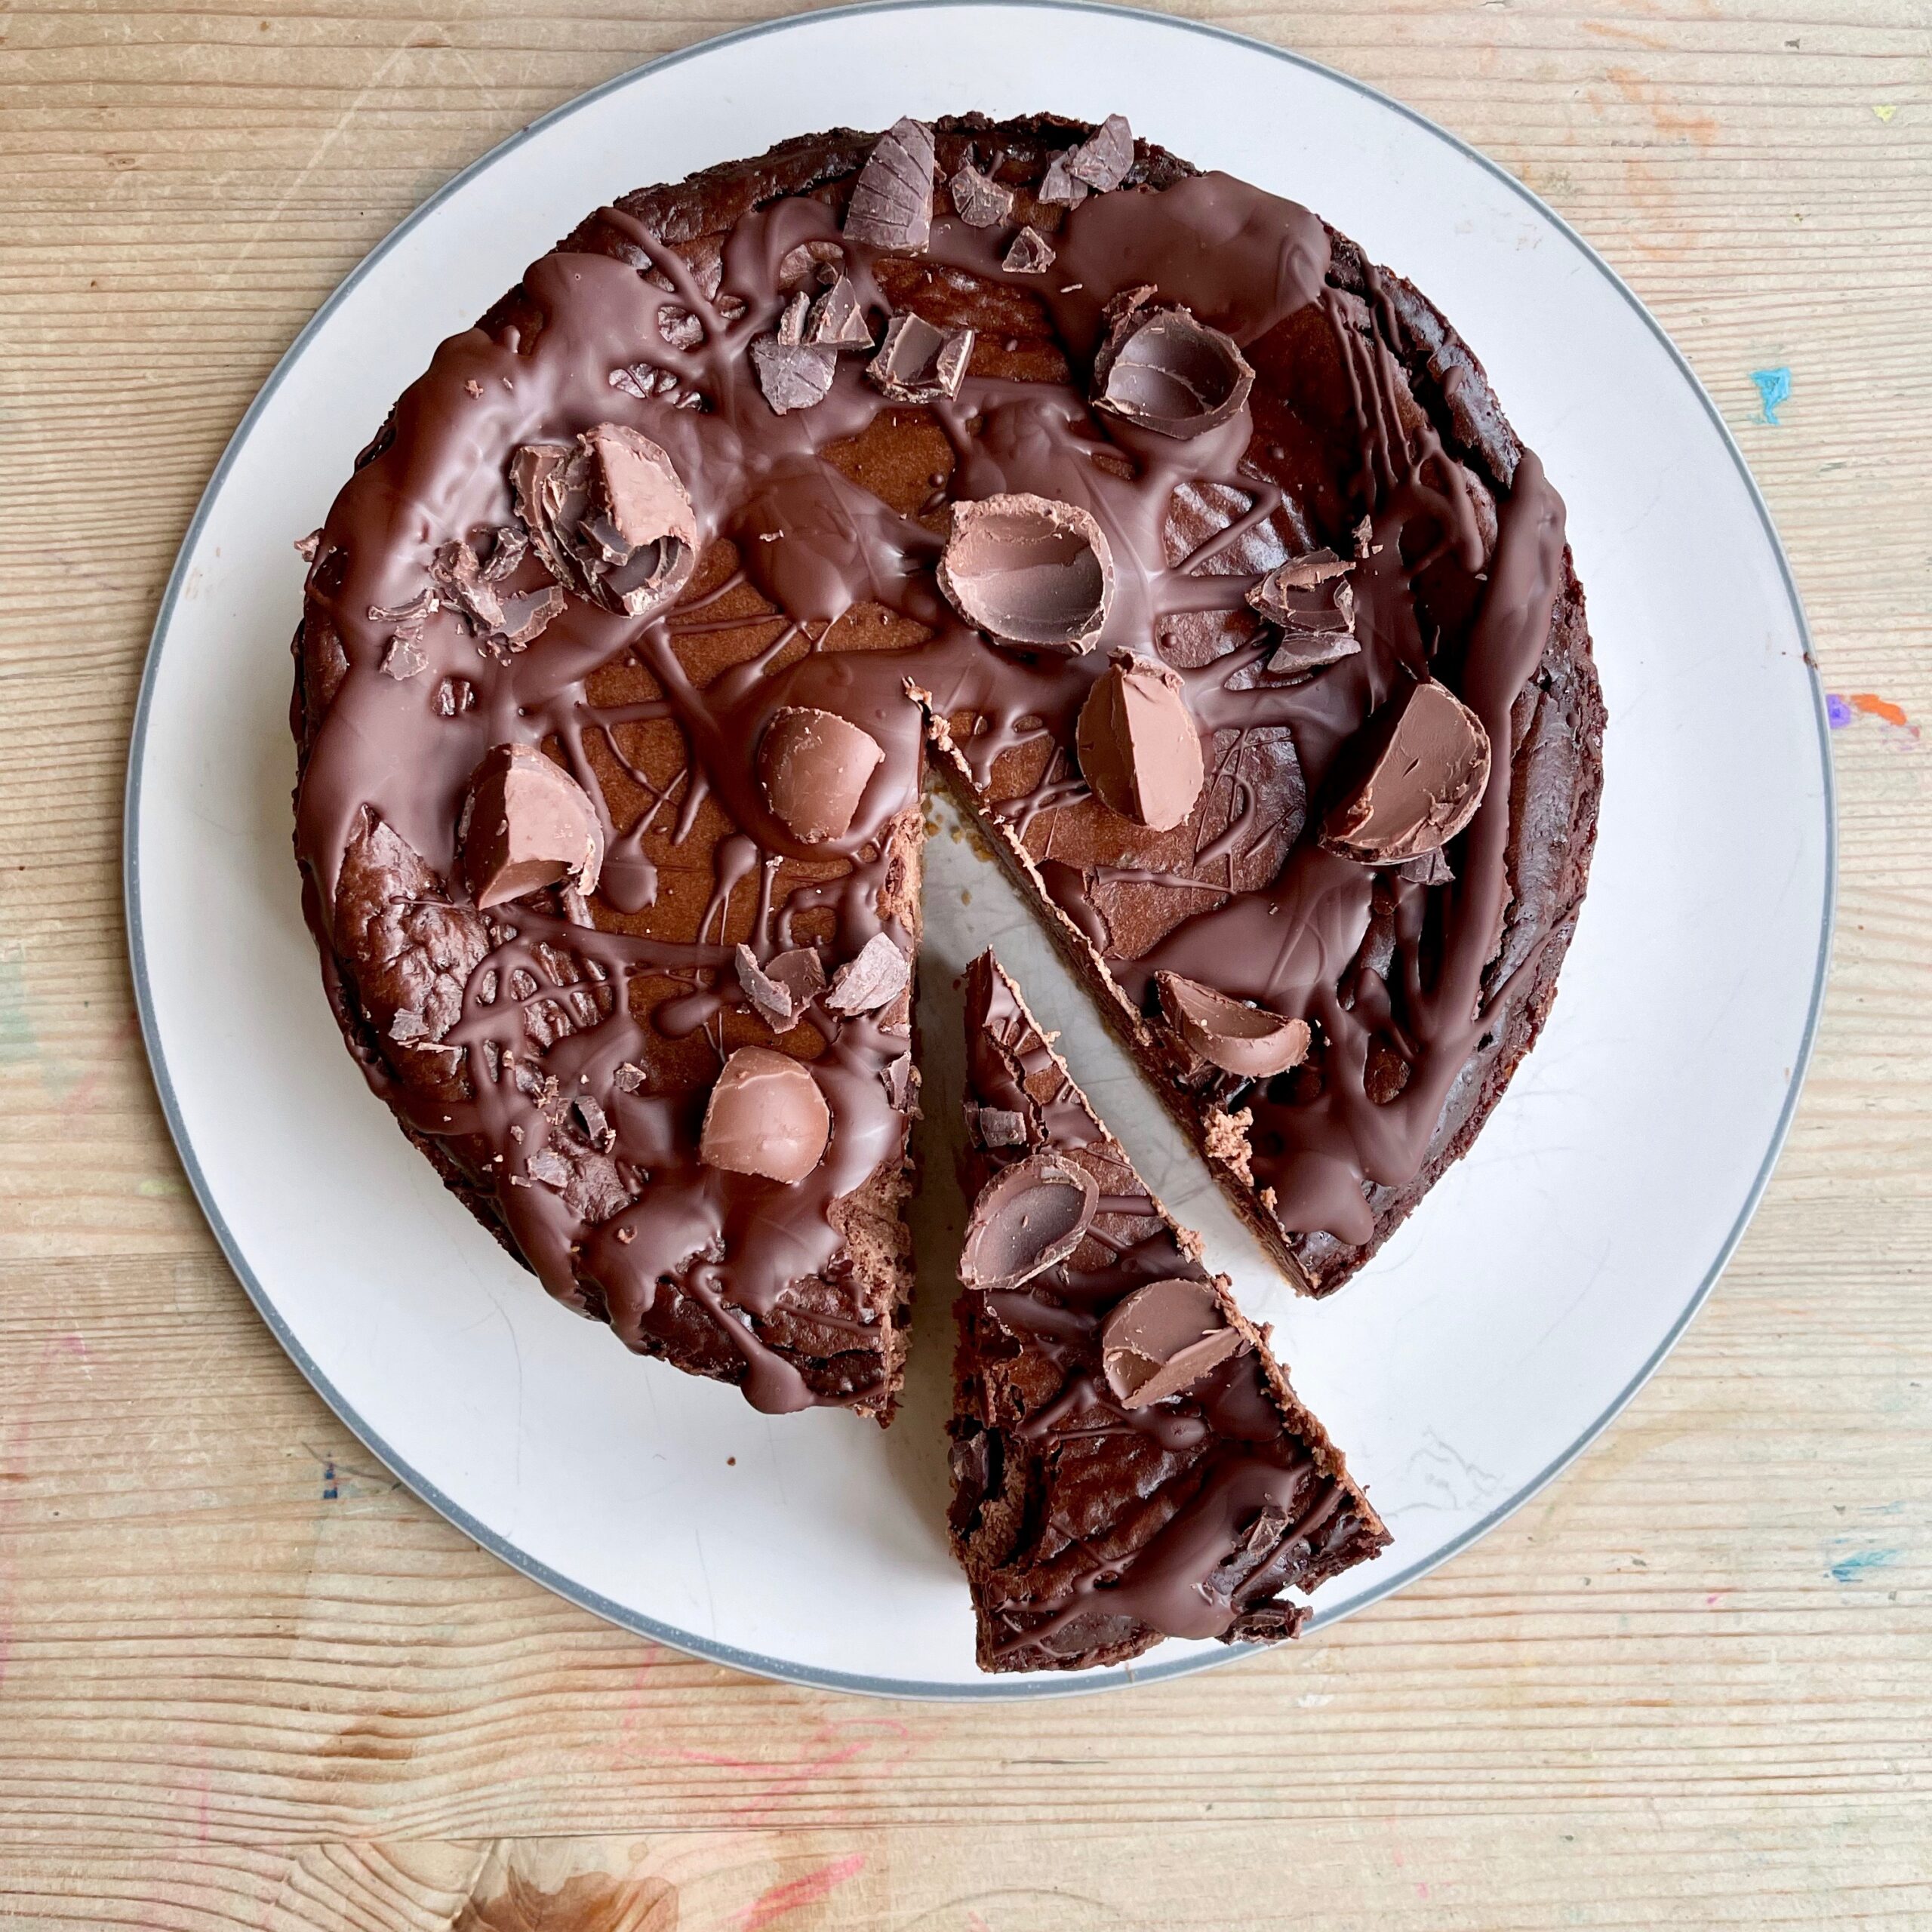 Low carb baked chocolate cheesecake